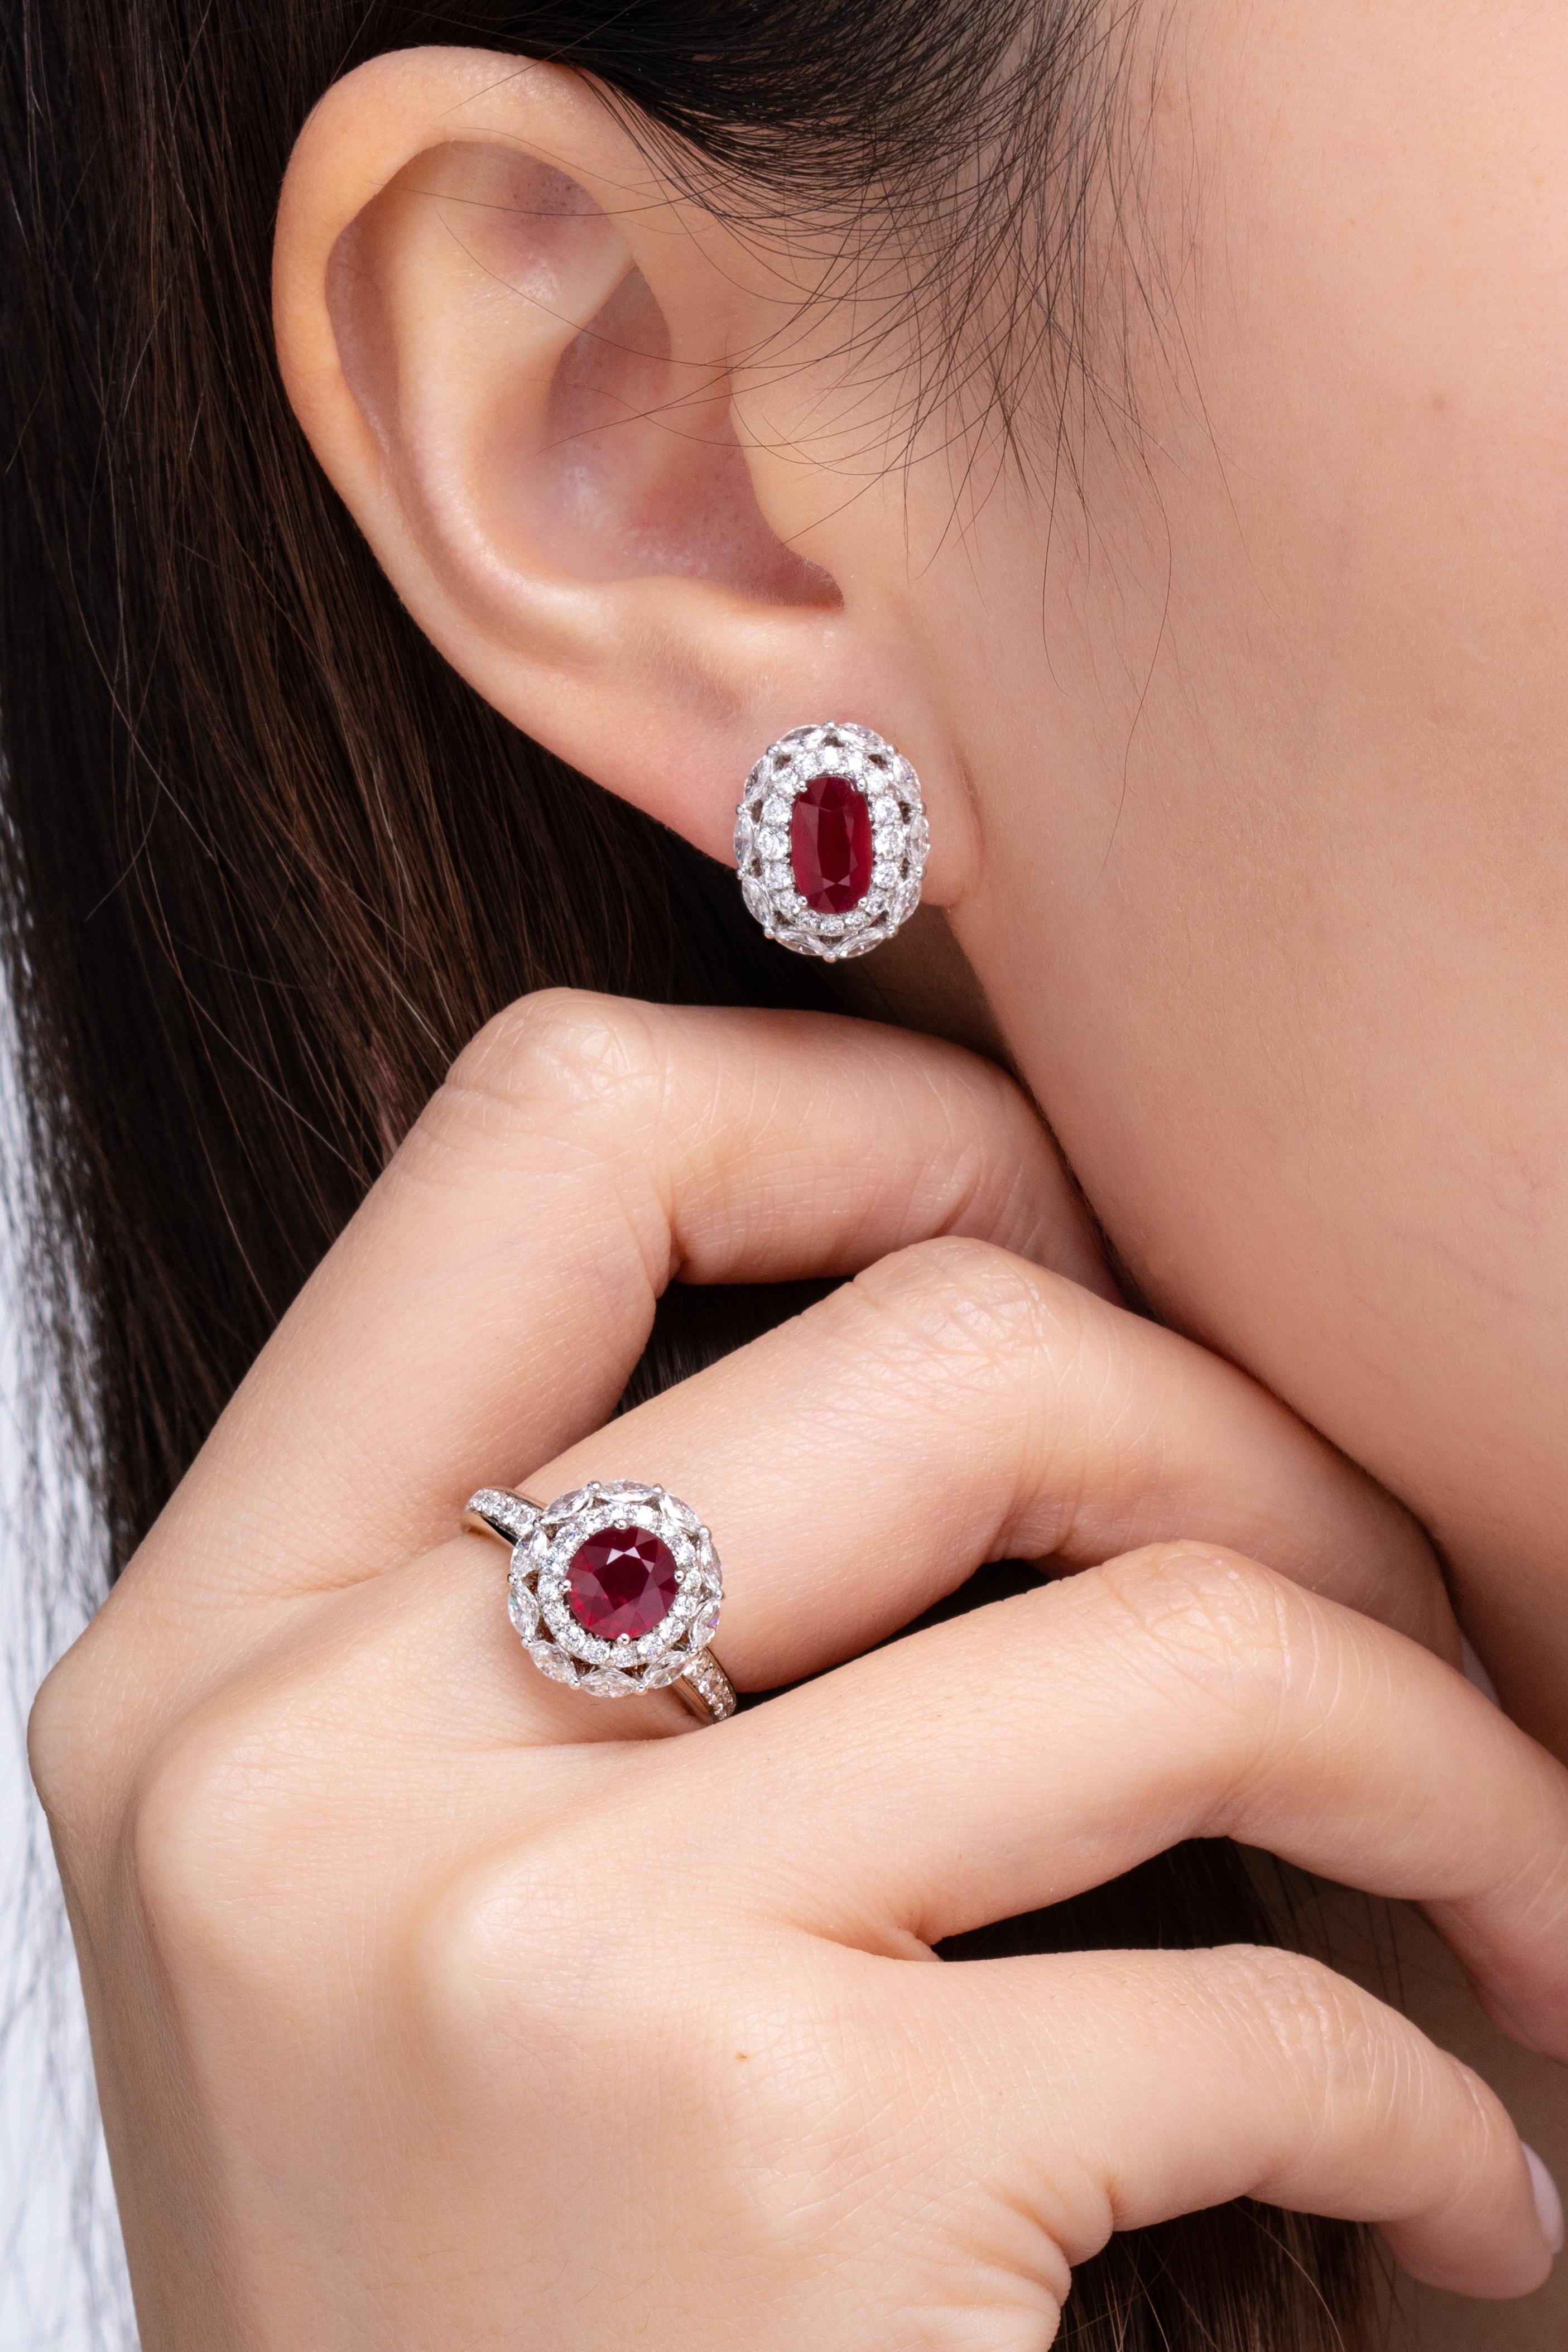 Pigeon's Blood rubies are considered the most prestigious color grading amongst rubies worldwide. This set certifies that all 3 oval shape rubies are Mozambique Pigeon's Blood rubies that have not been artificially heated. The ruby ring is 1.53